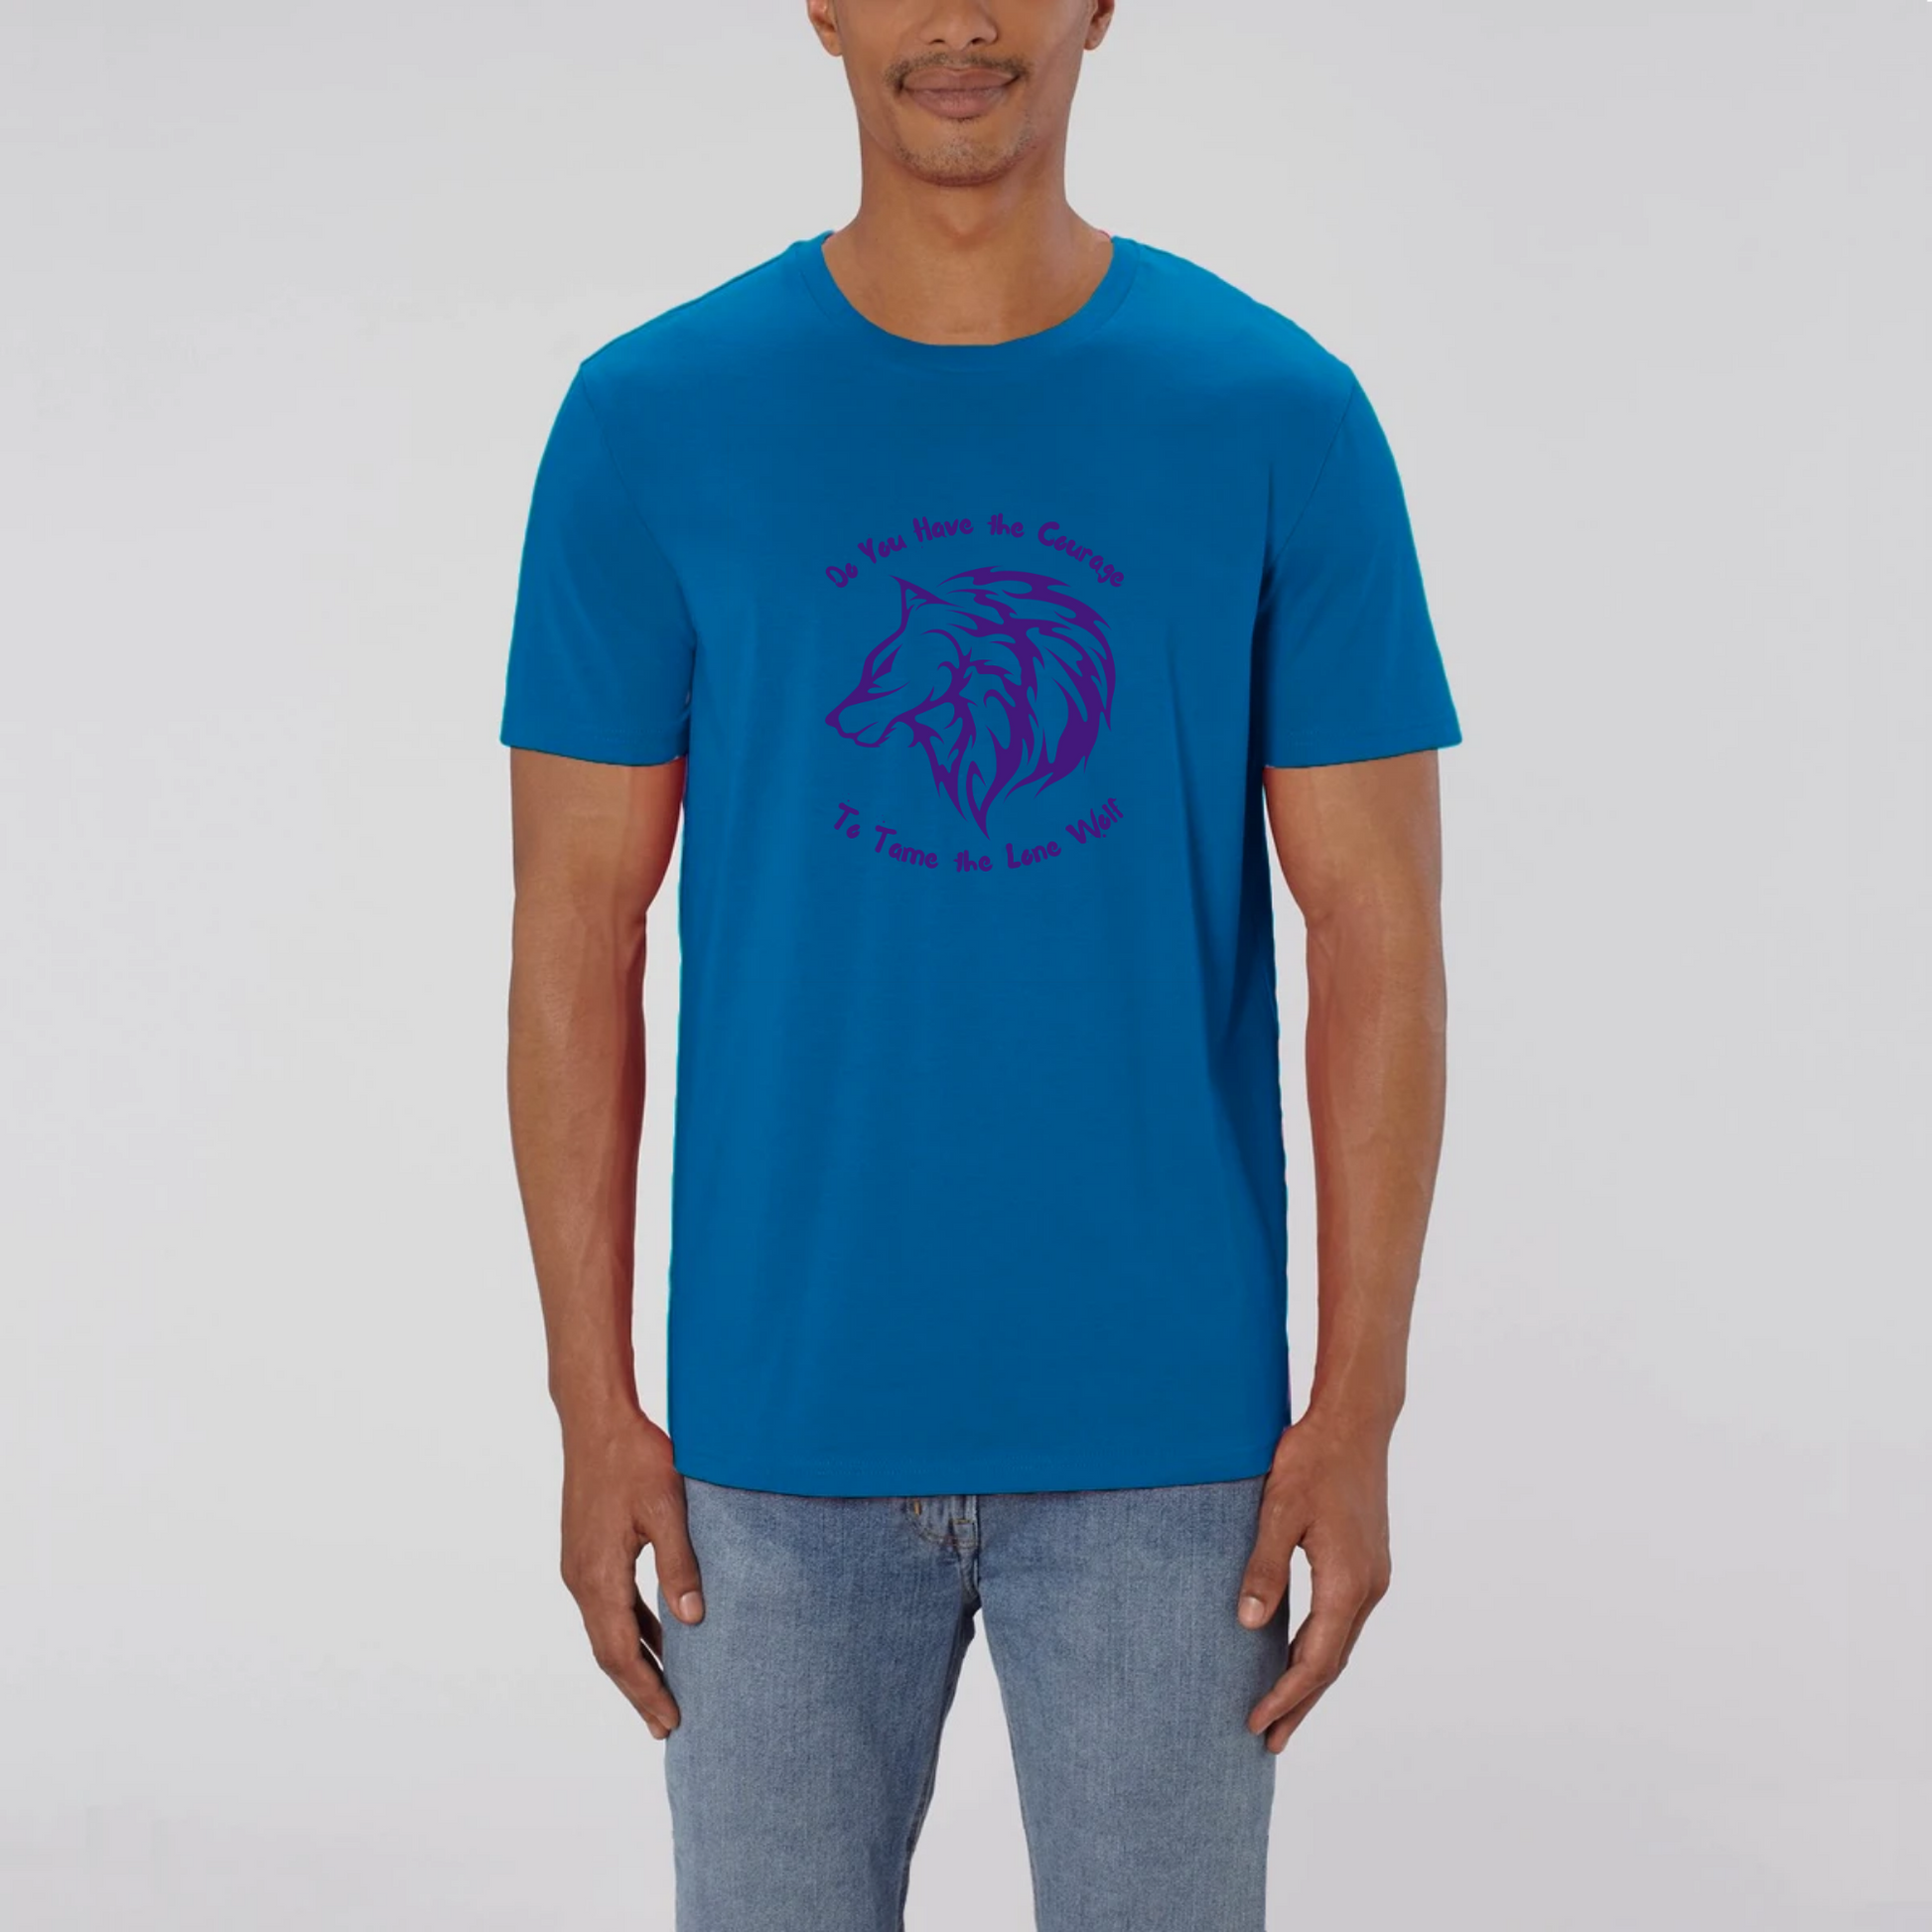 Graphic design t-shirt for men which features the head of a lone male wolf with the words "Do You Have the Courage to Tame the Lone Wolf". The t-shirt is blue